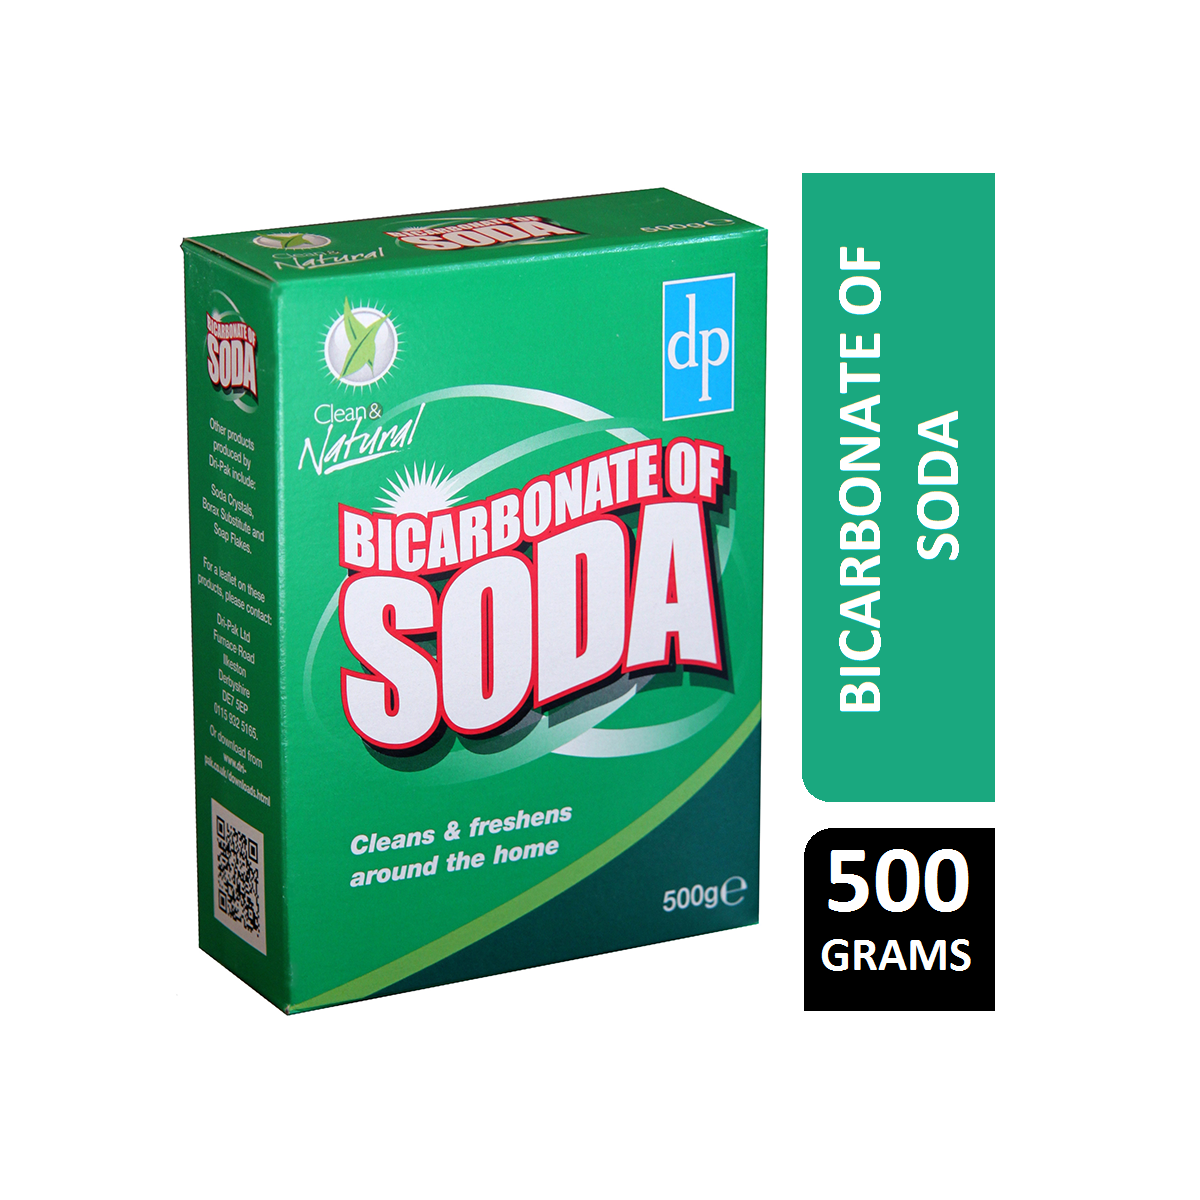 Where to Buy Bicarbonate of Soda